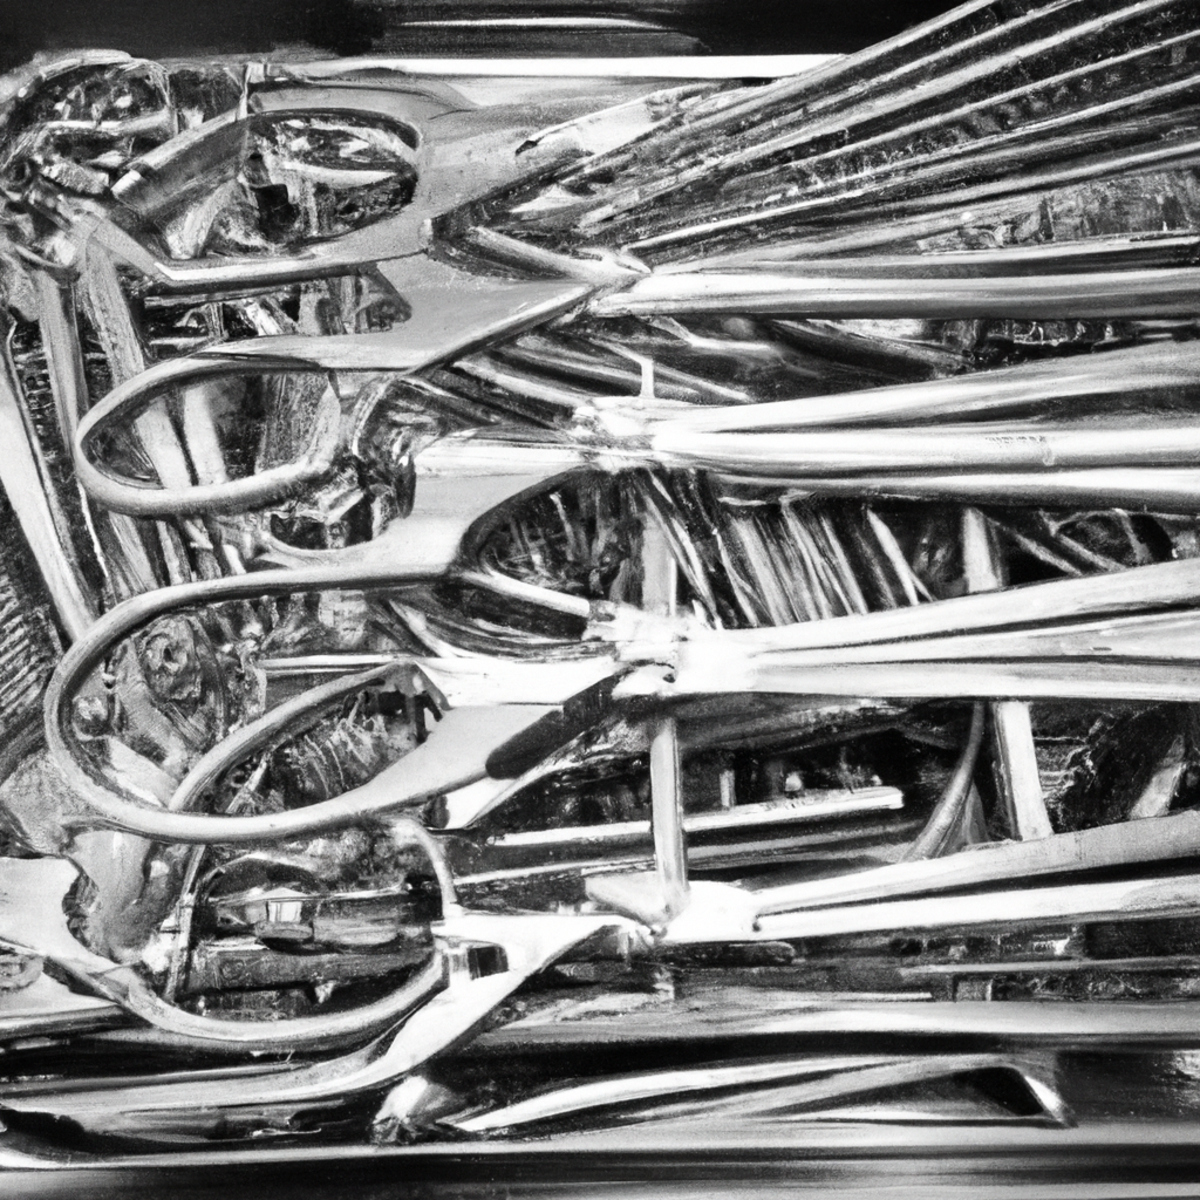 Surgical instrument tray with gleaming, intricate tools for gallbladder duplication surgeries.